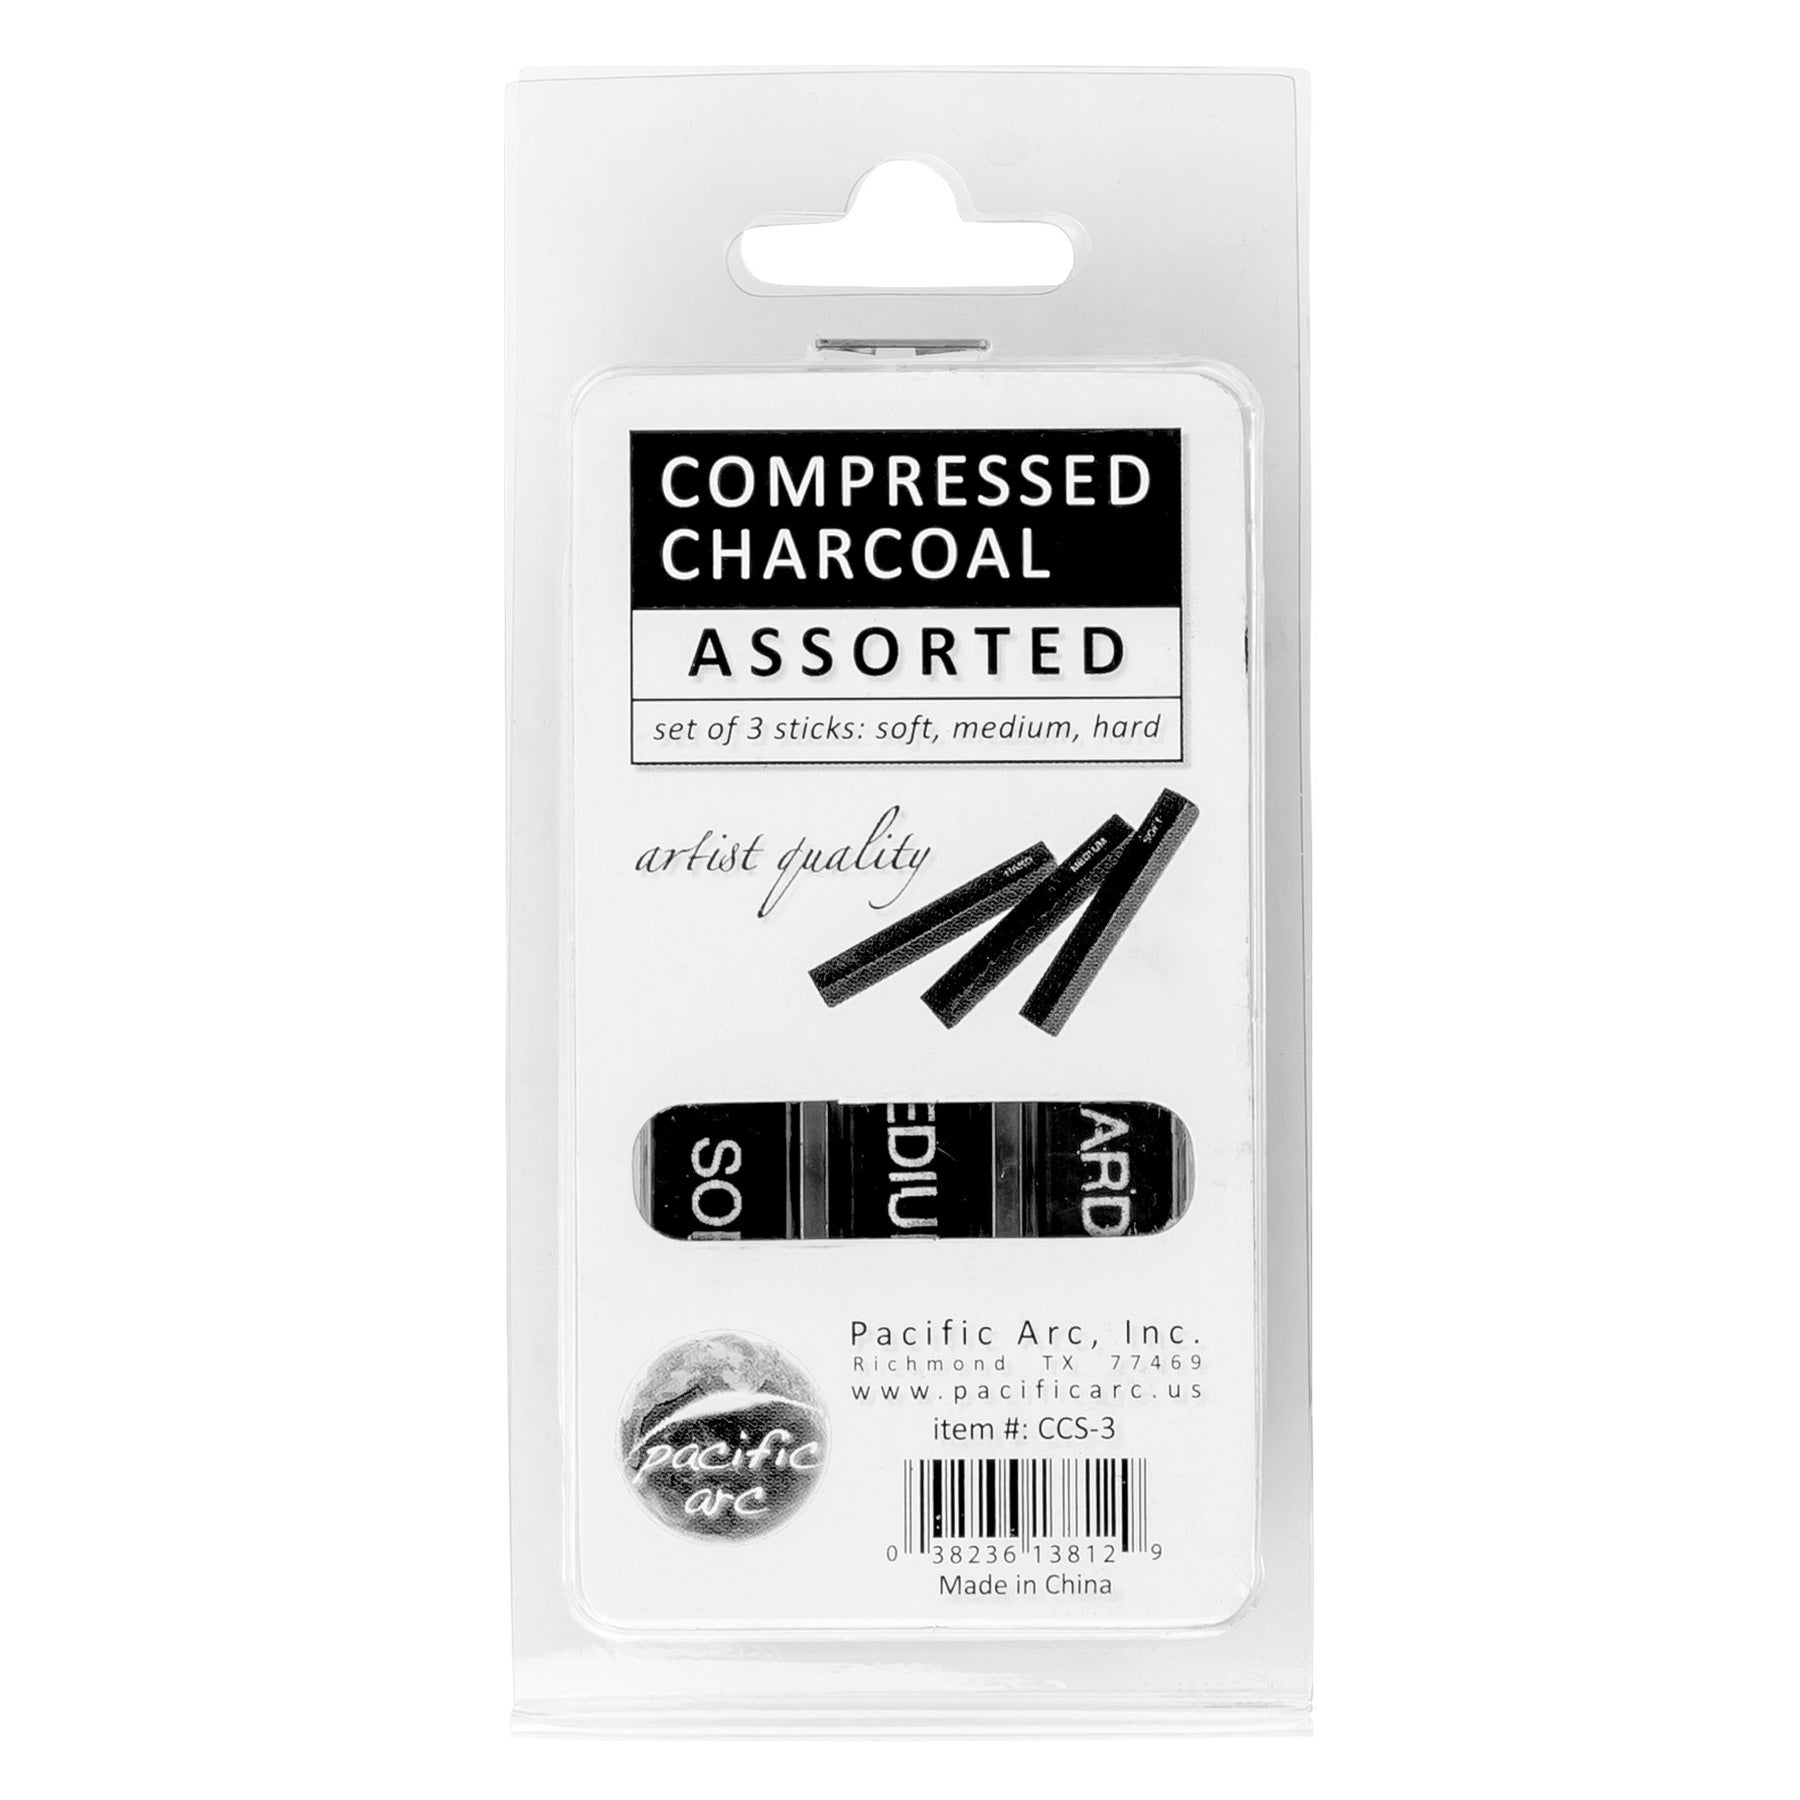  Pacific Arc Artist Vine Charcoal, Medium, Black 12 Pieces,  Artist Vine Charcoal Sticks, Medium and Smooth Drawing Charcoal : Arts,  Crafts & Sewing